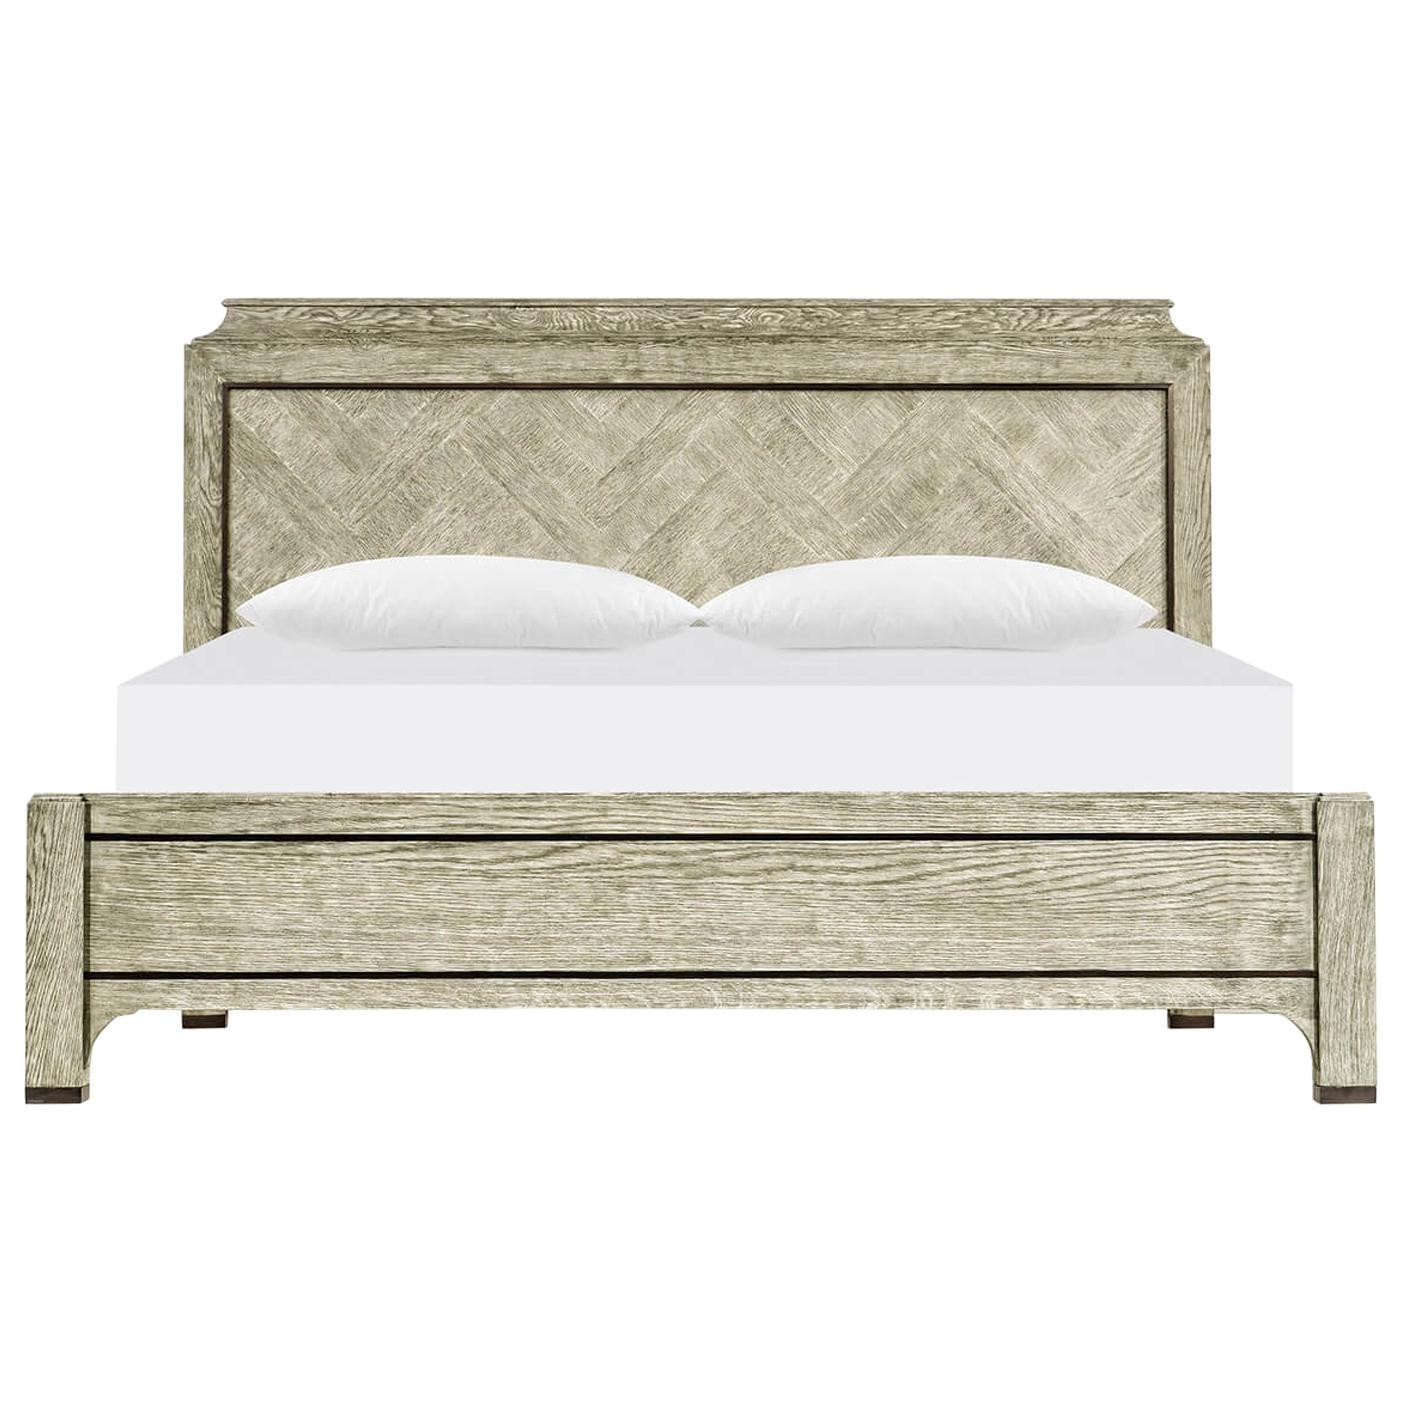 A modern greyed oak king size bed with herringbone parquetry headboard, with brass trim and square post legs.

Dimensions: 83 3/8